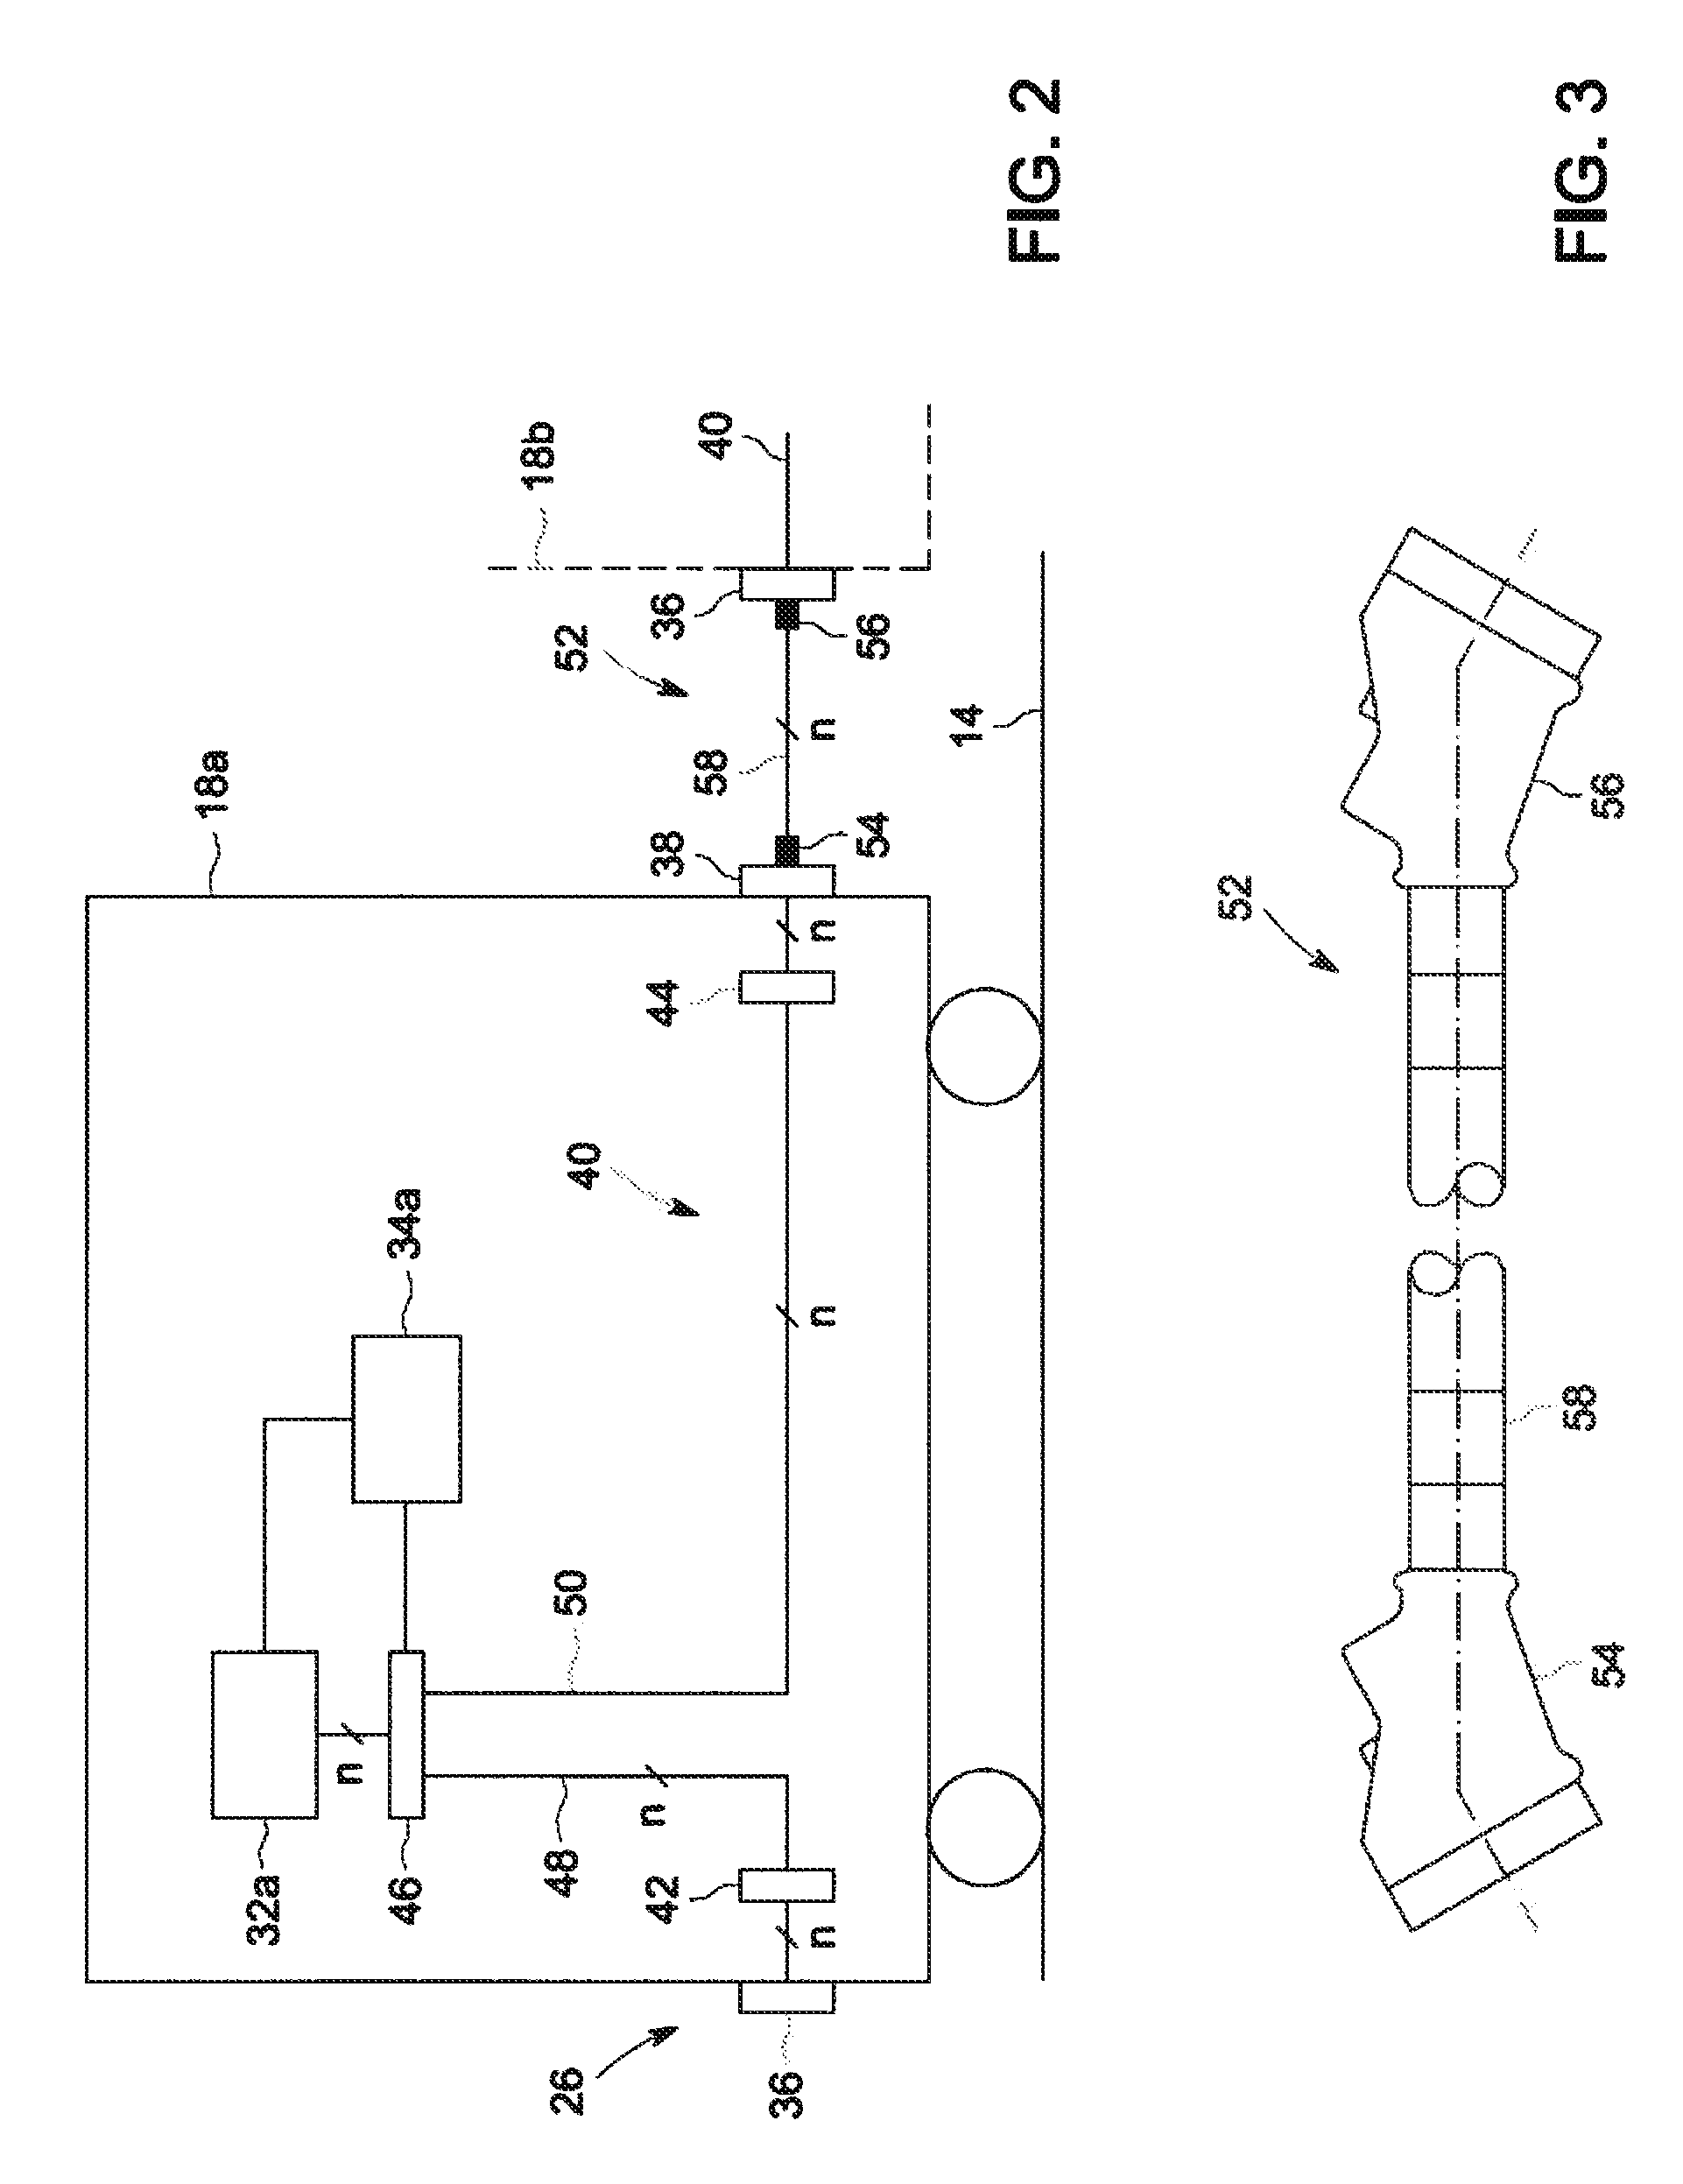 System and method for locomotive inter-consist equipment sparing and redundancy